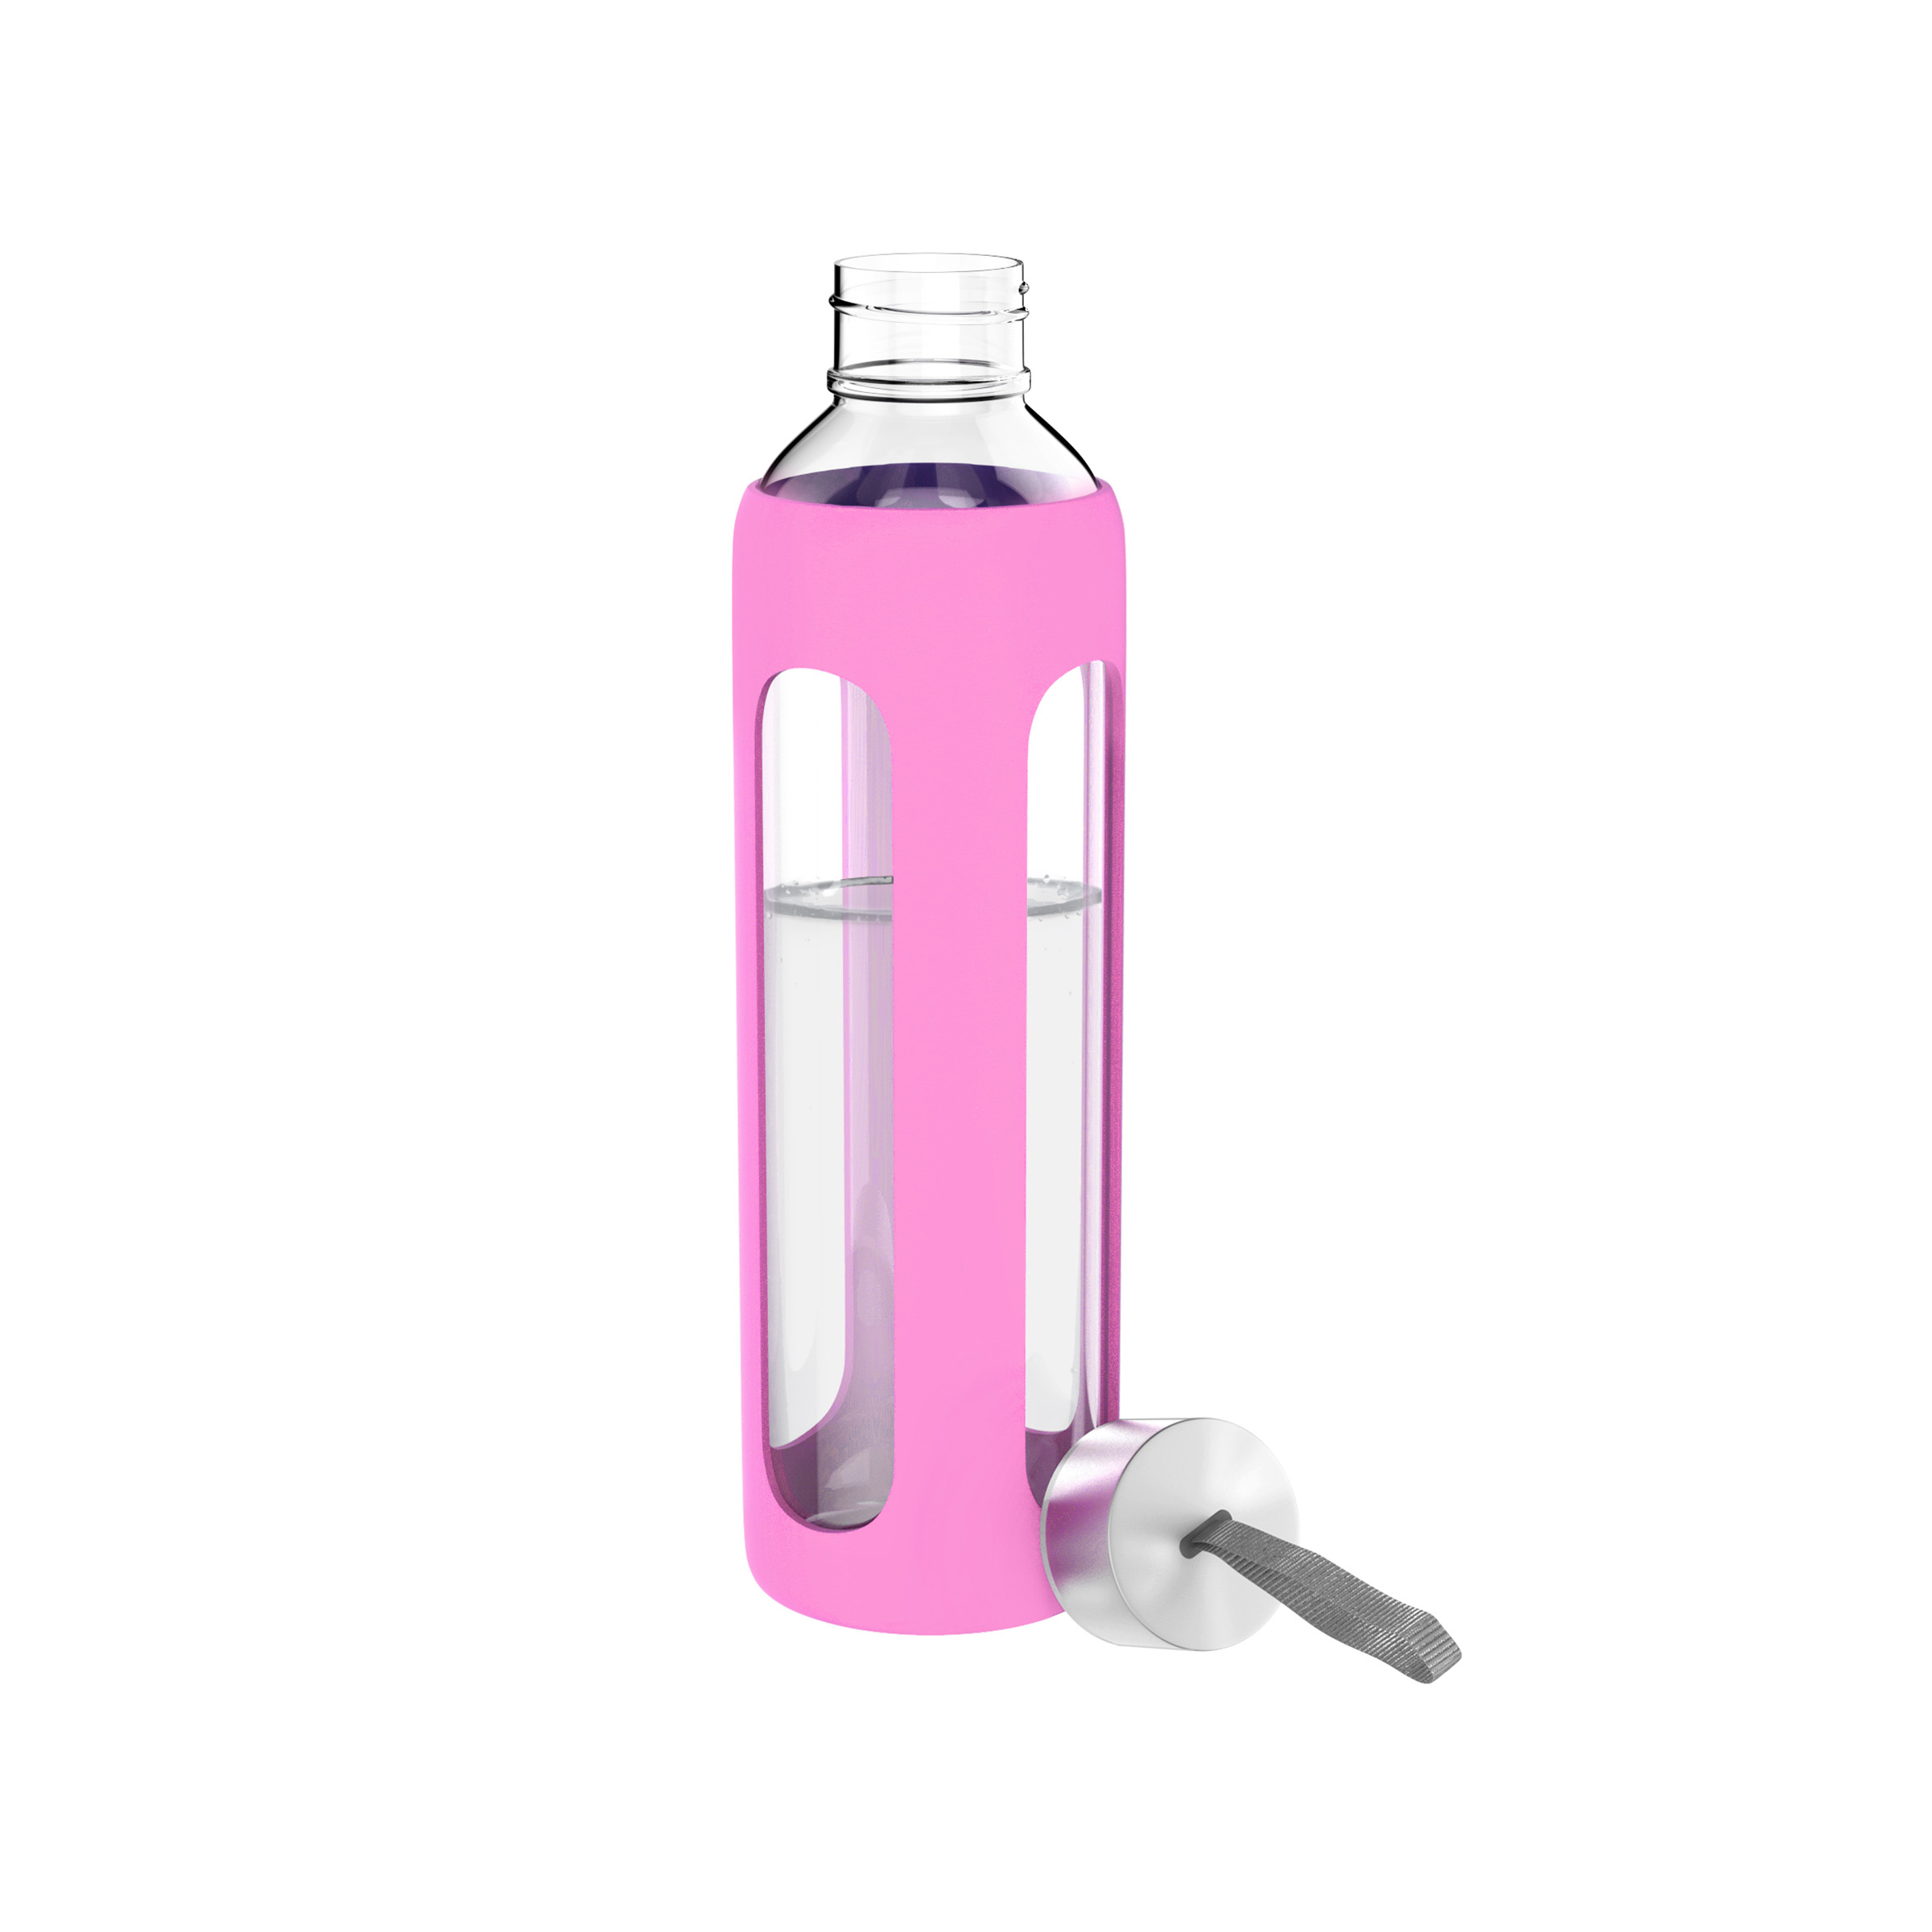 Glass Reusable Water Bottle 20 Oz BPA Free Pink Silicone Sleeve Leak Proof Lid